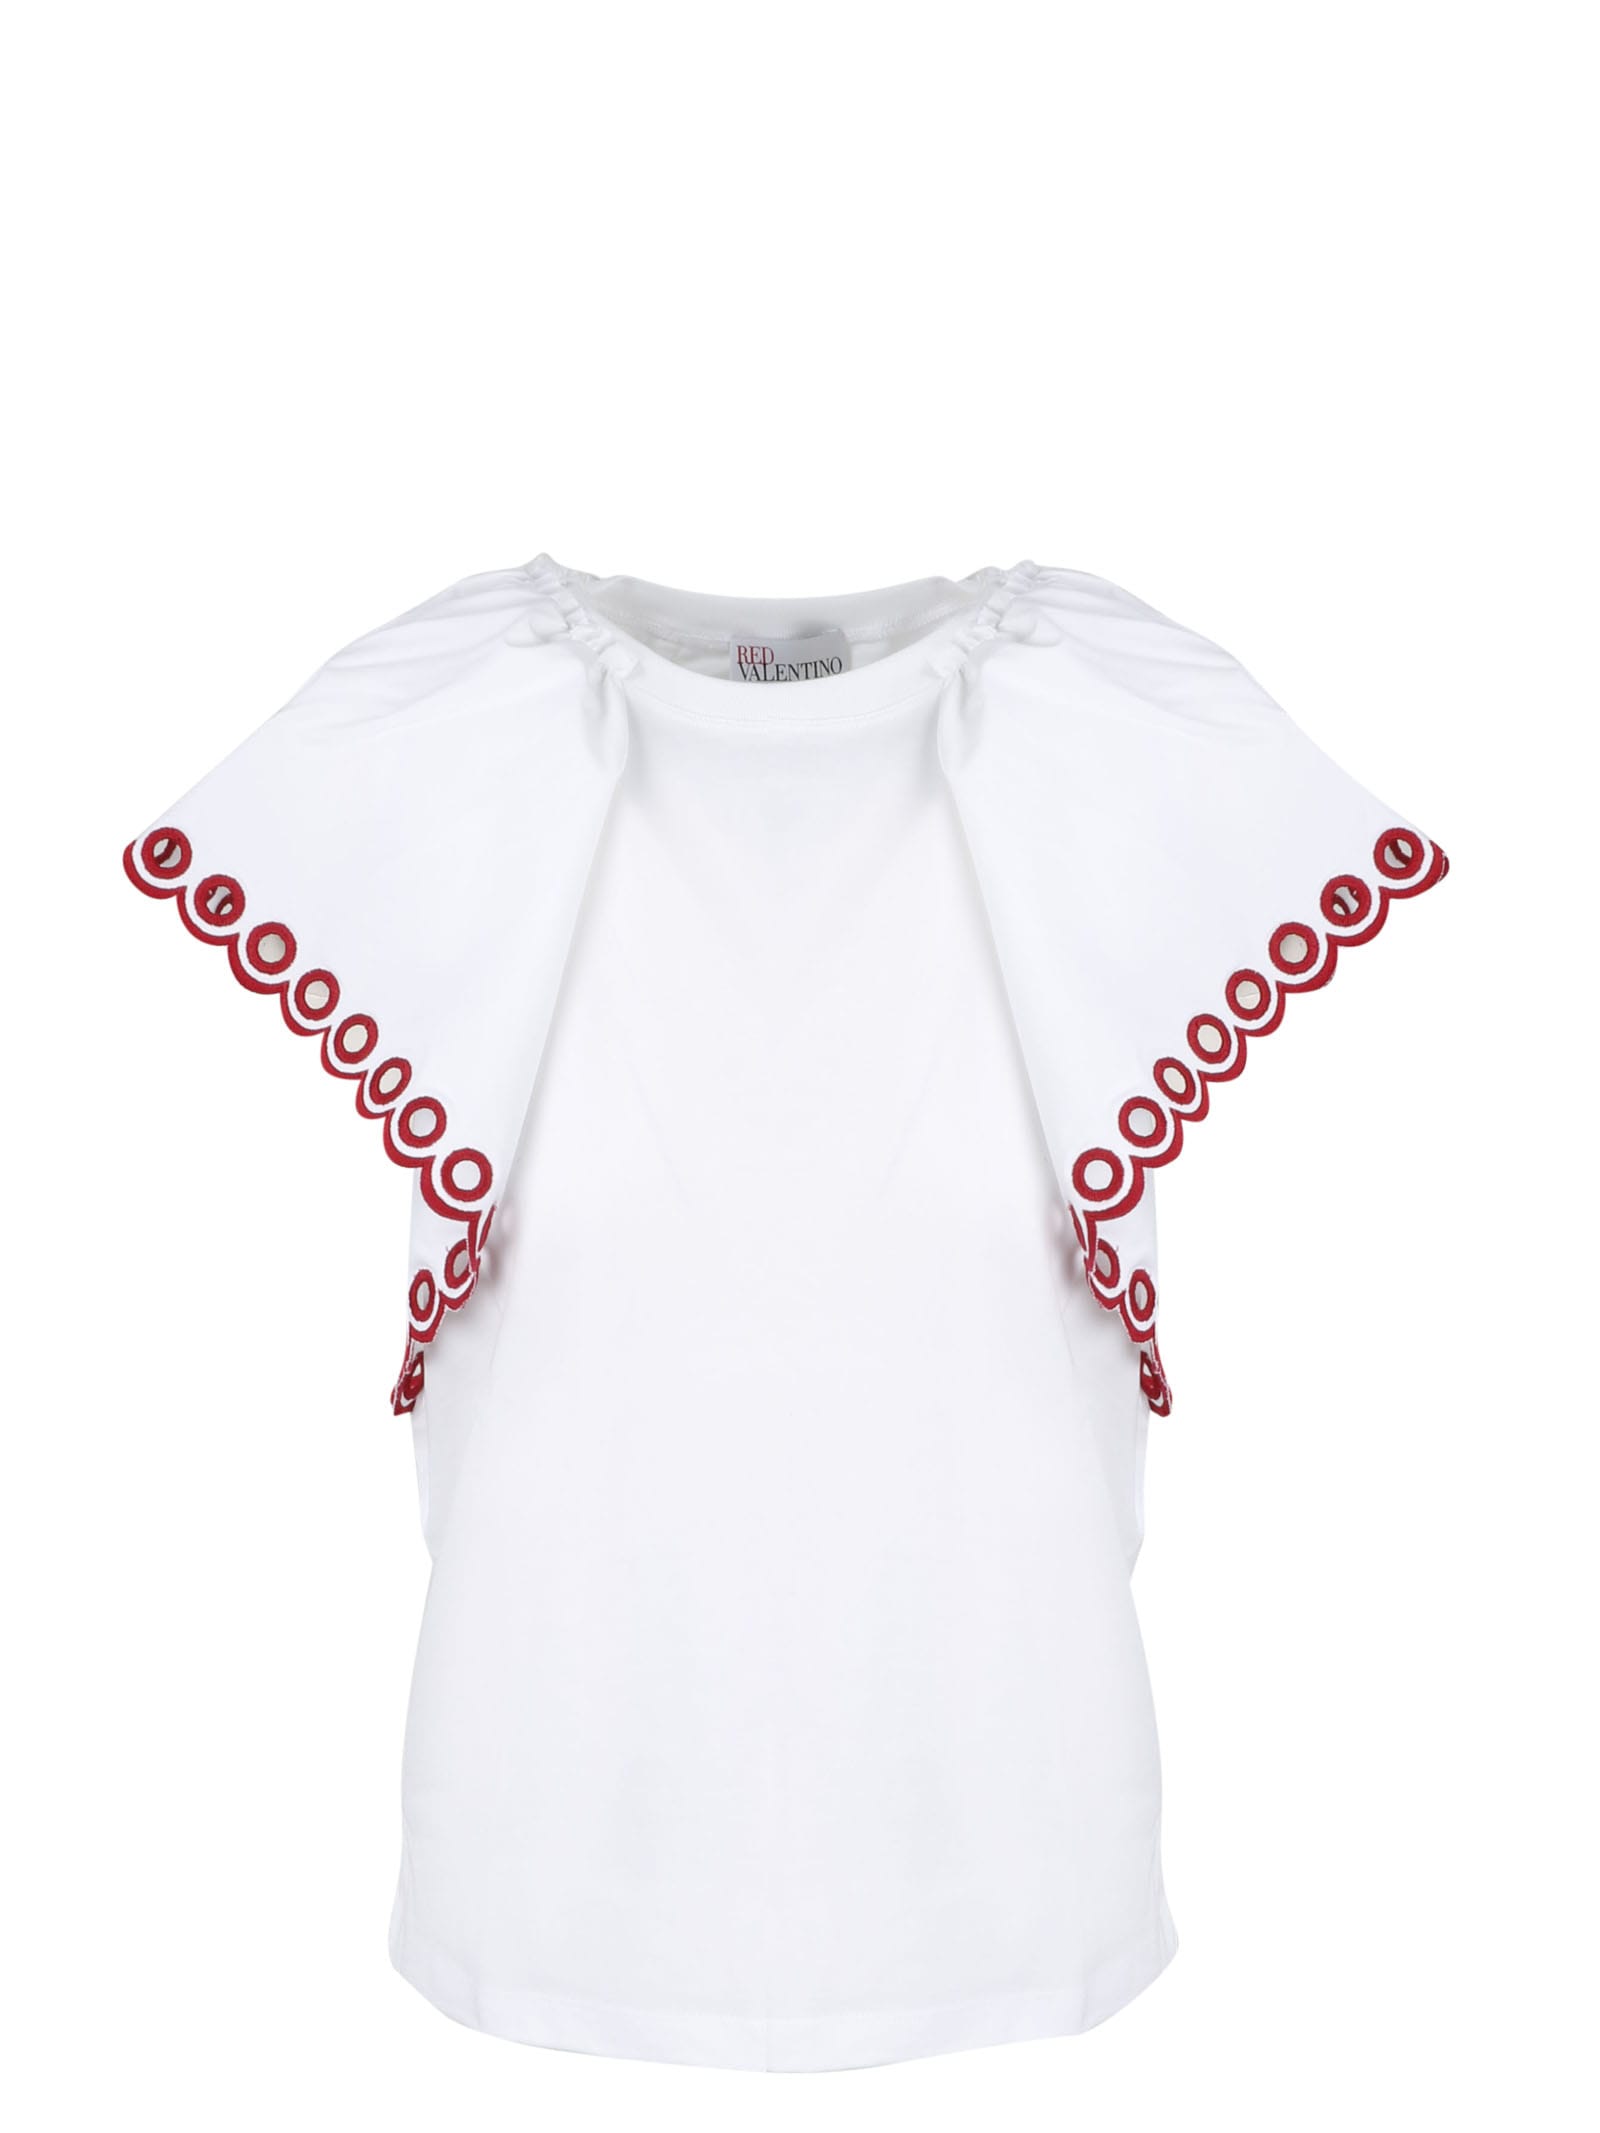 RED VALENTINO LARGE EMBROIDERED SLEEVES T-SHIRT,VR0MG09I5W4 0BO